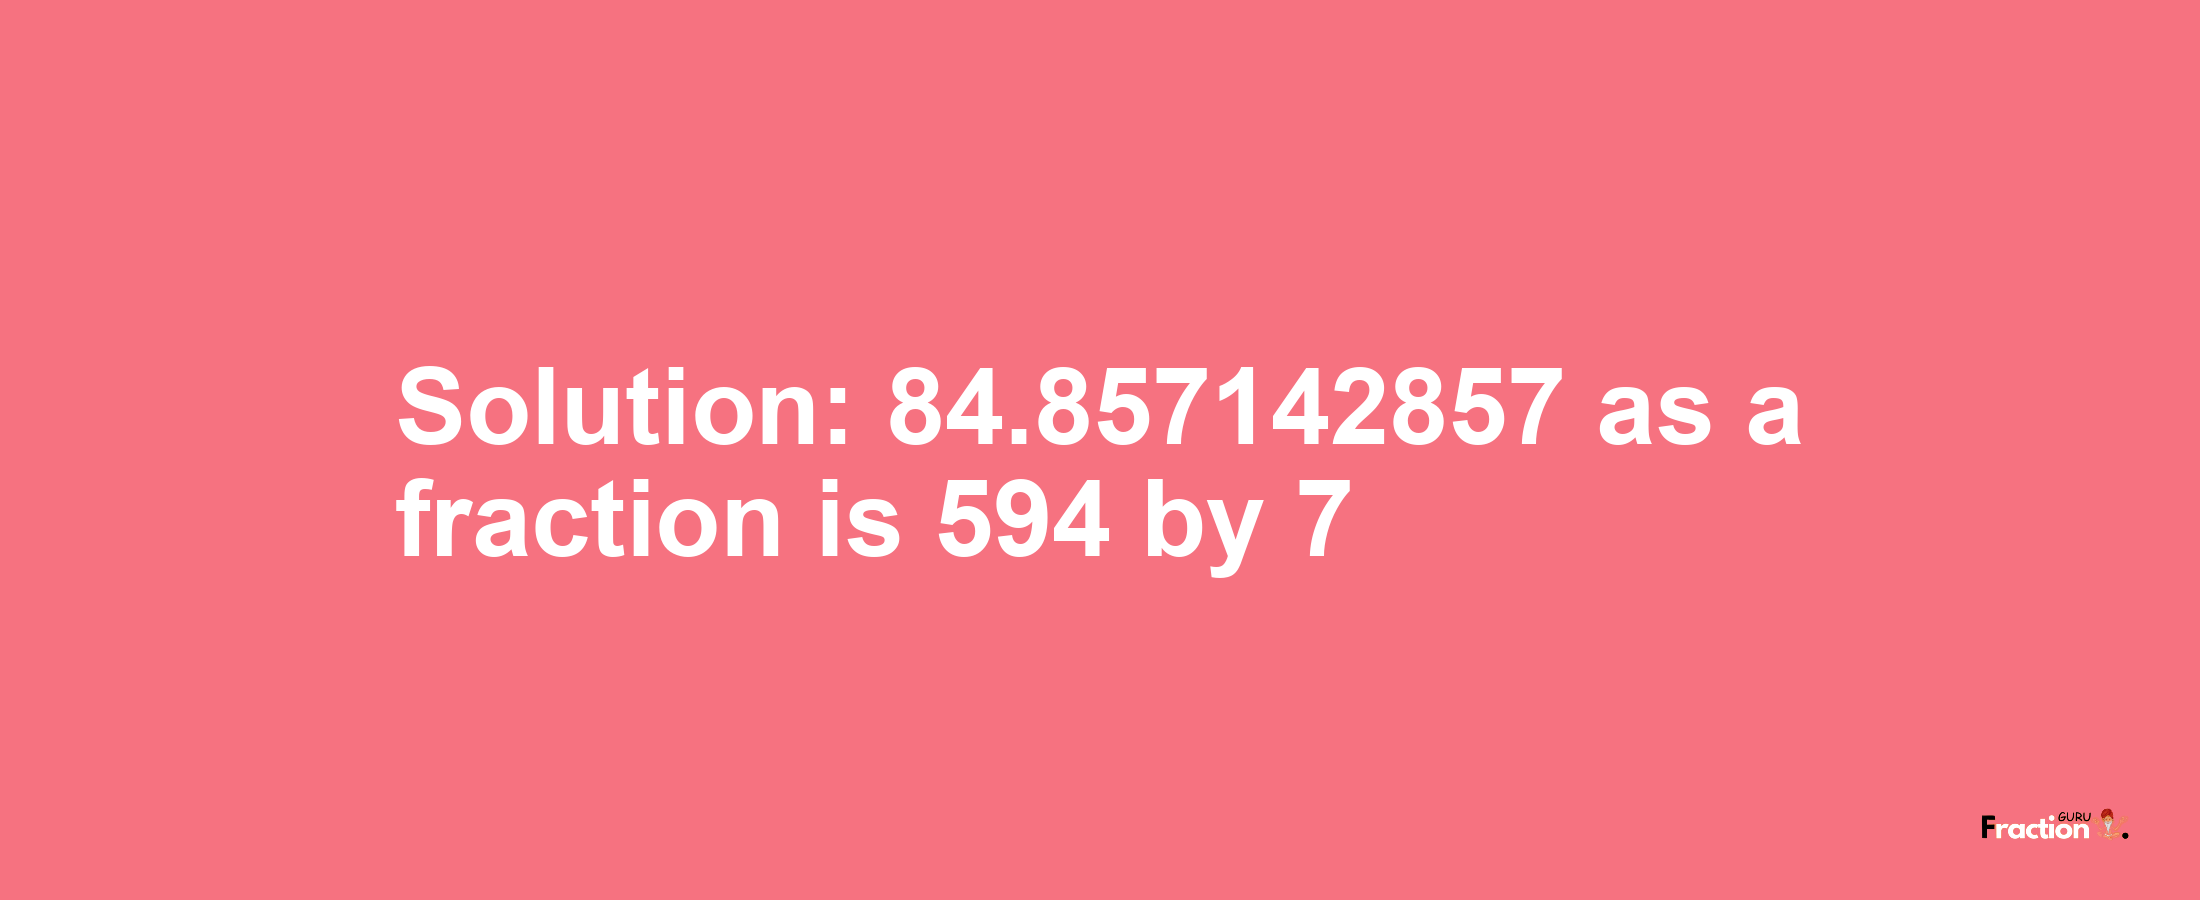 Solution:84.857142857 as a fraction is 594/7